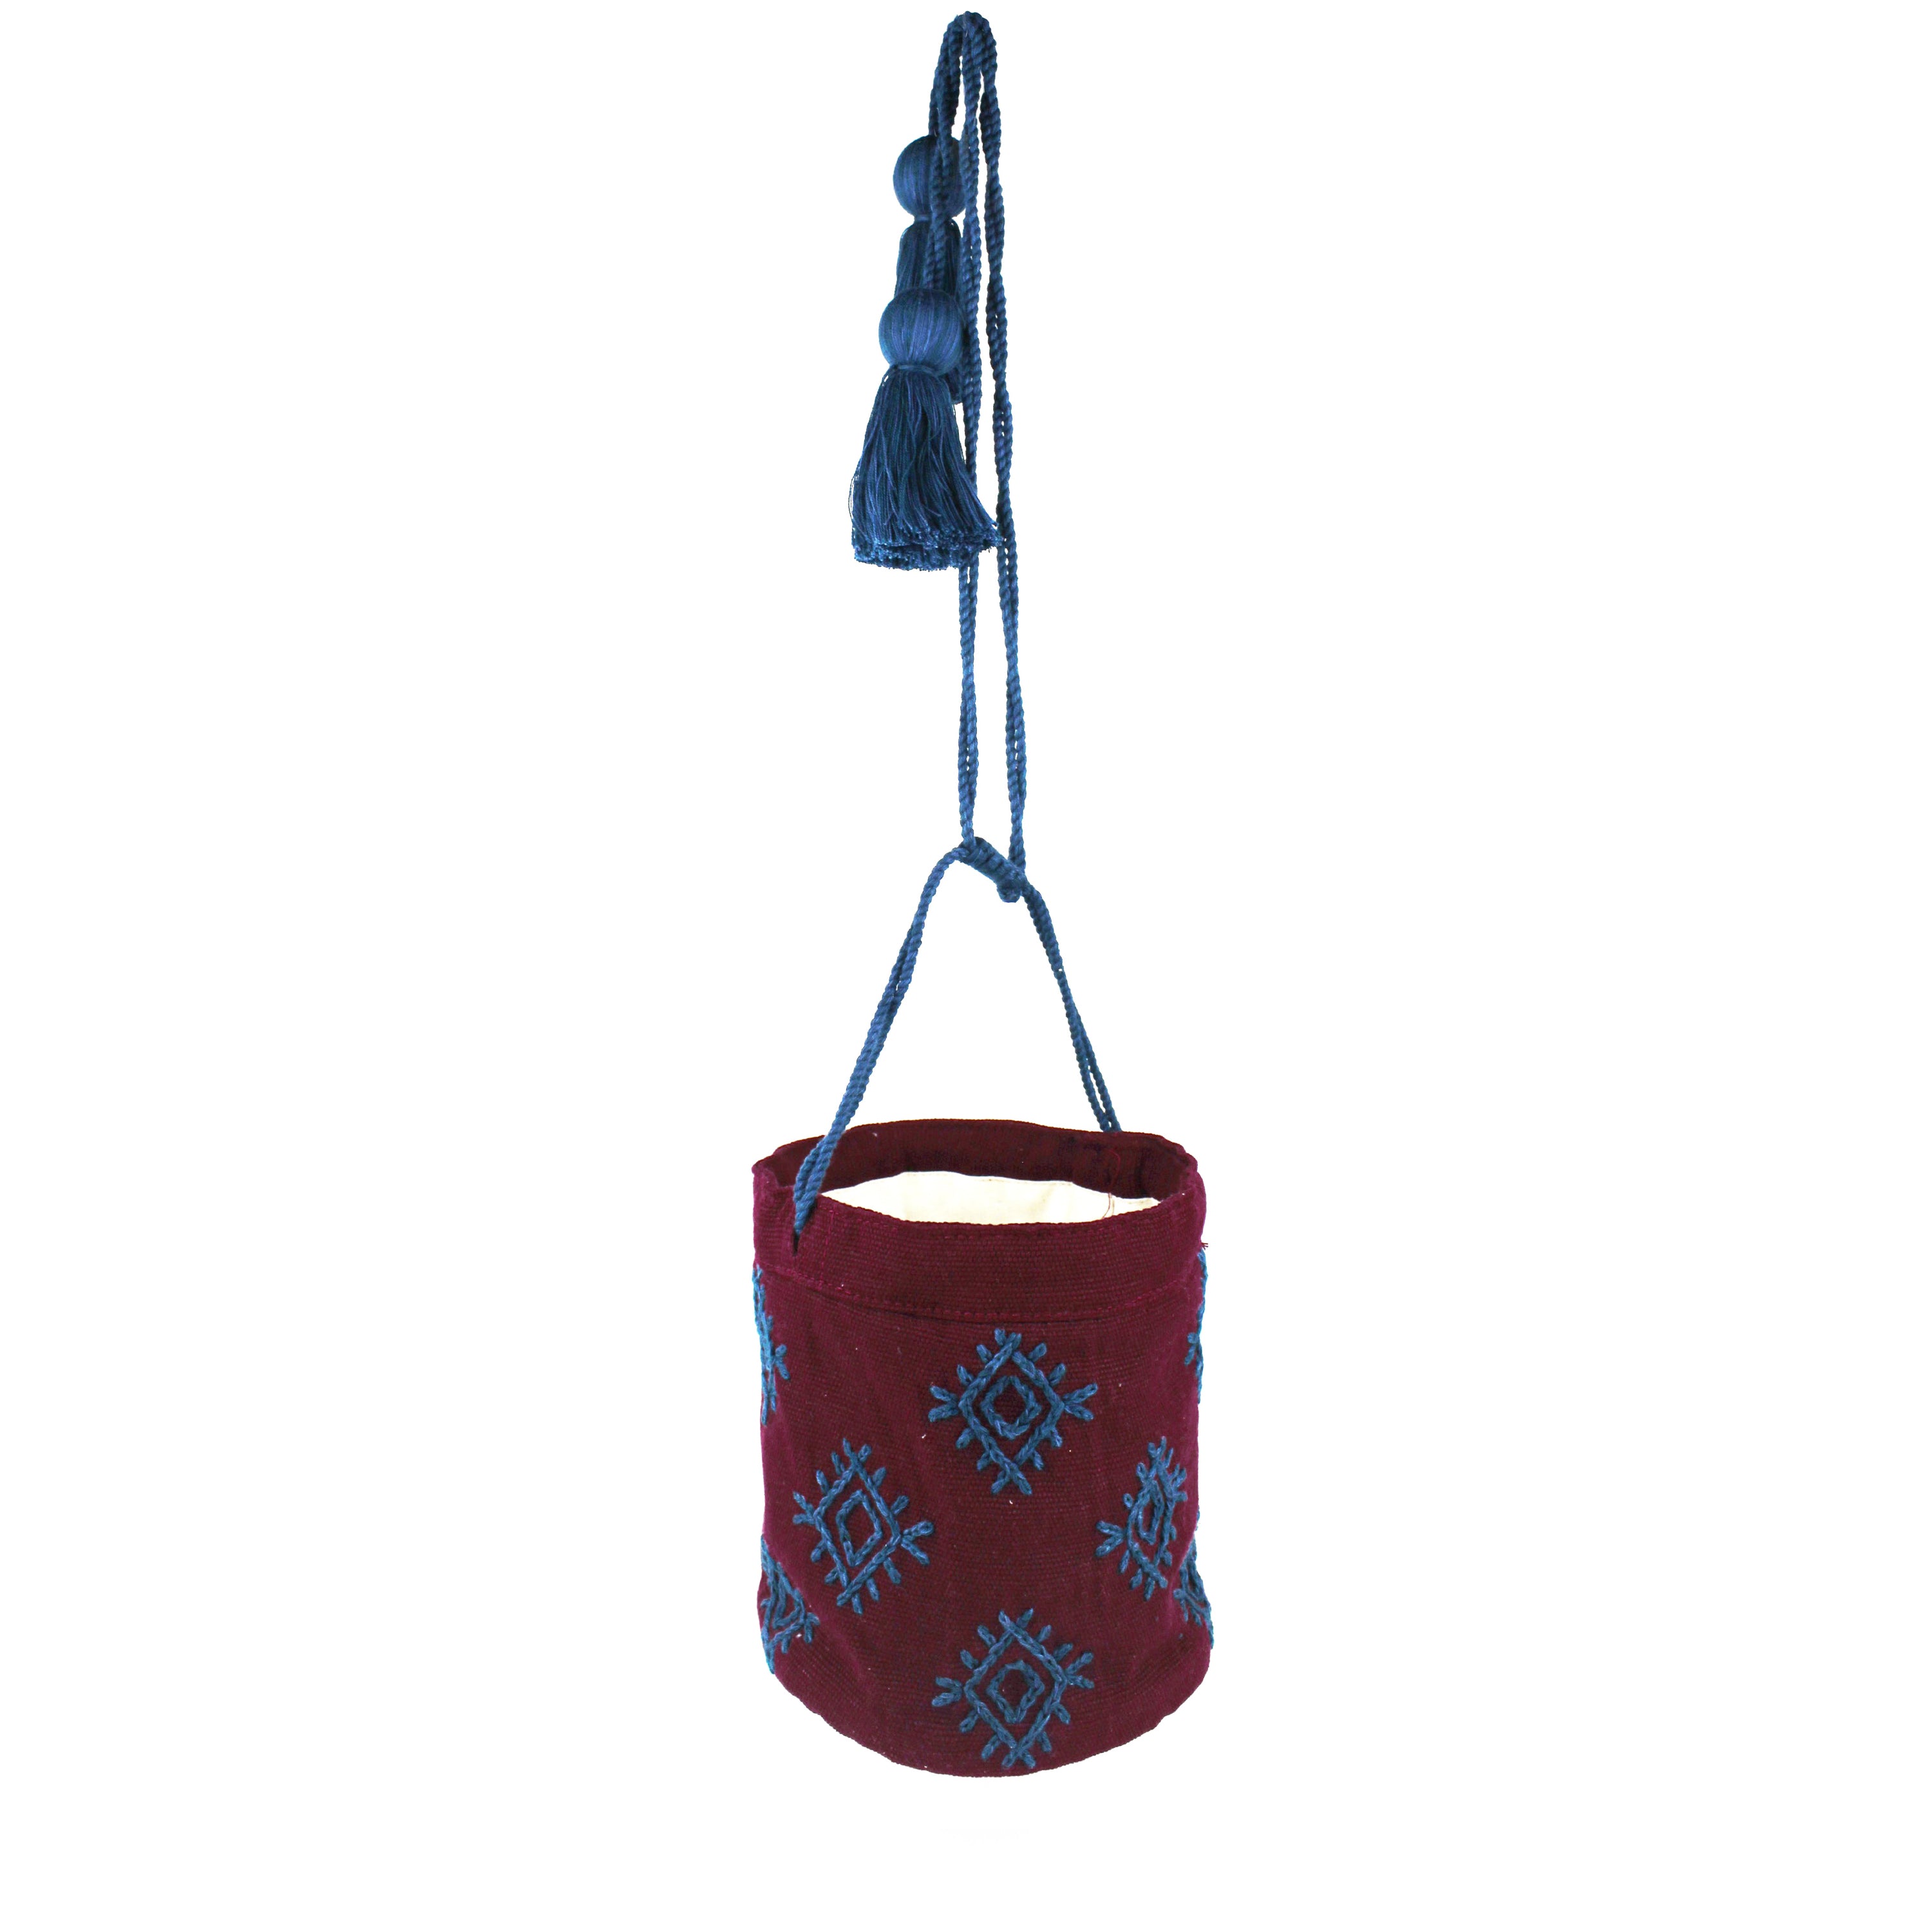 The hand woven artisan Hermelinda bag in Mountain Dusk. It is open and suspended by the blue drawstrings.